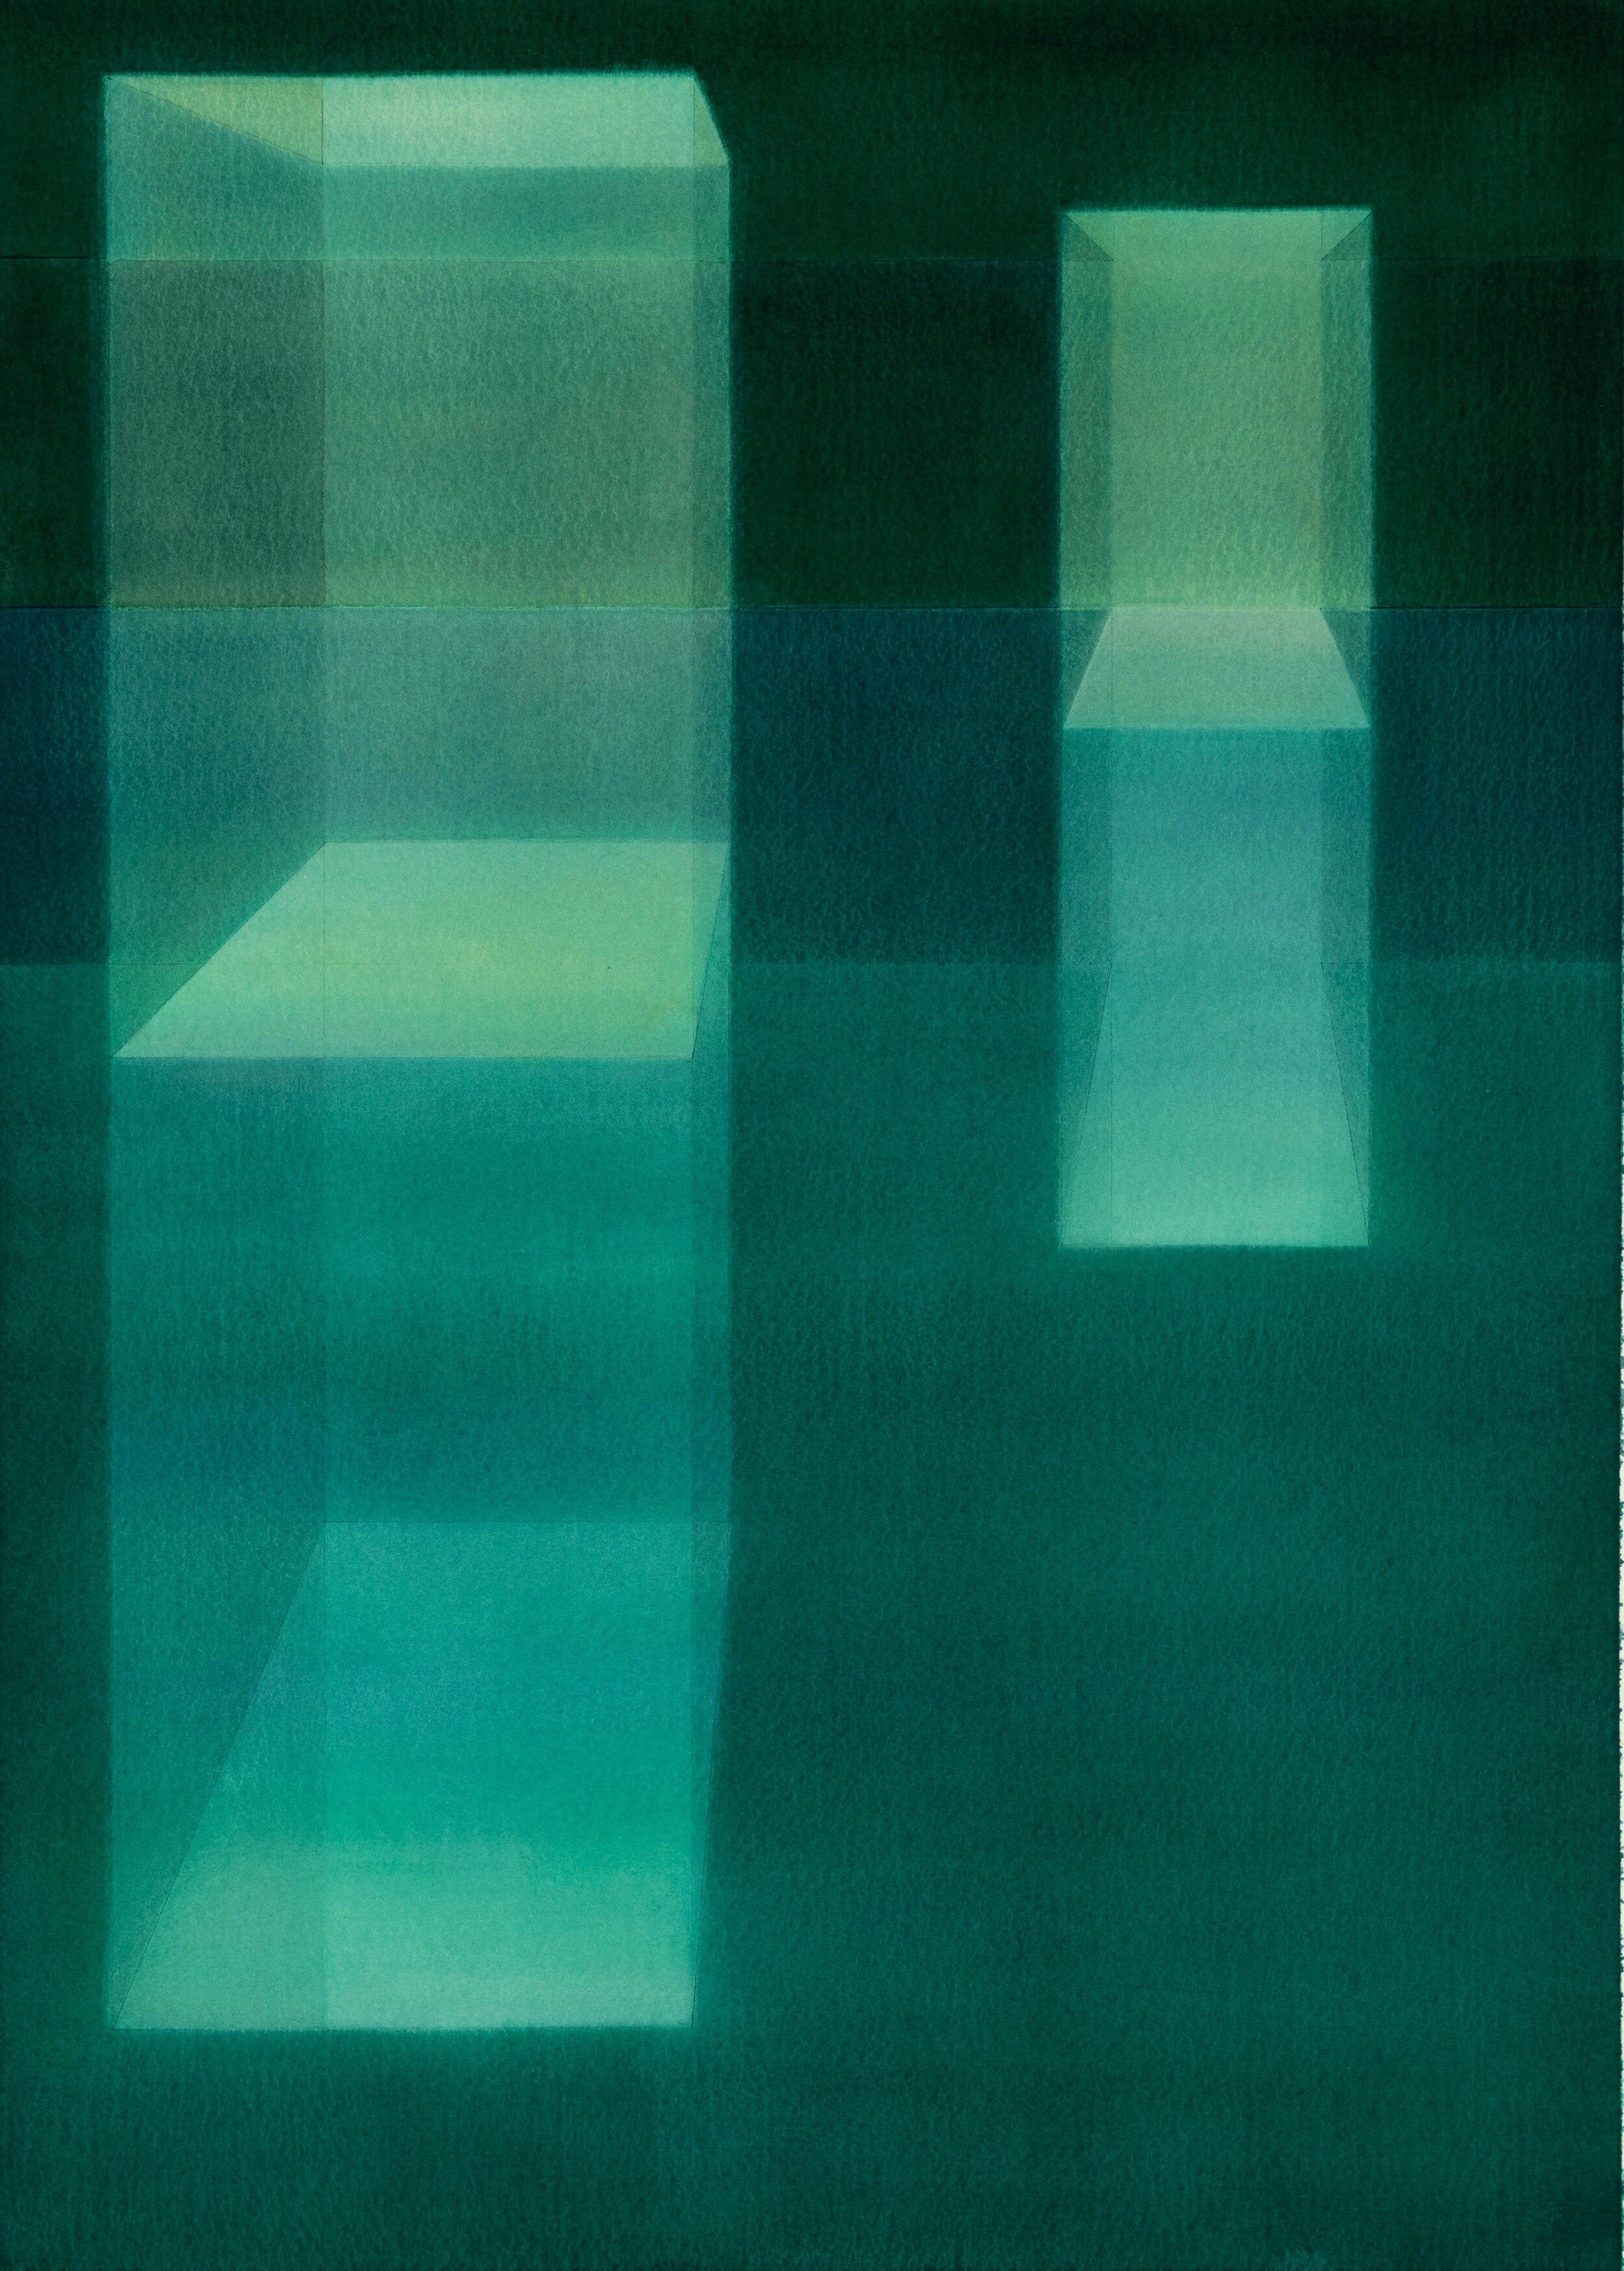   Suspended in Green (A7) , 2005 watercolor on paper 30 × 22 inches (76 × 56 cm) 